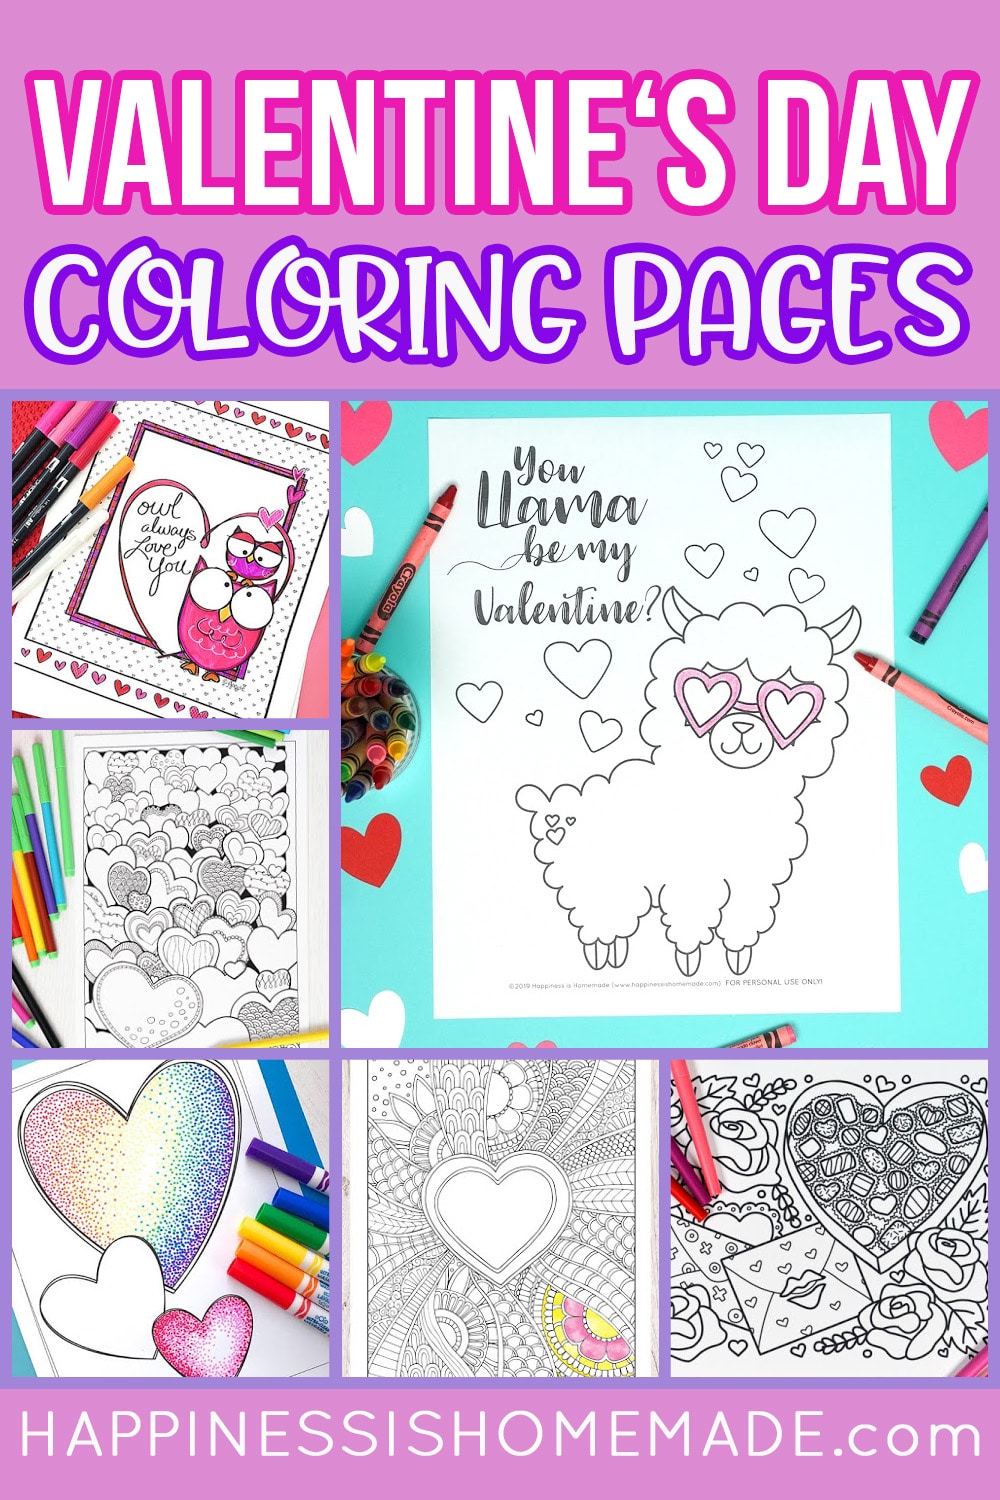 Free, Printable Valentine's Day Coloring Pages